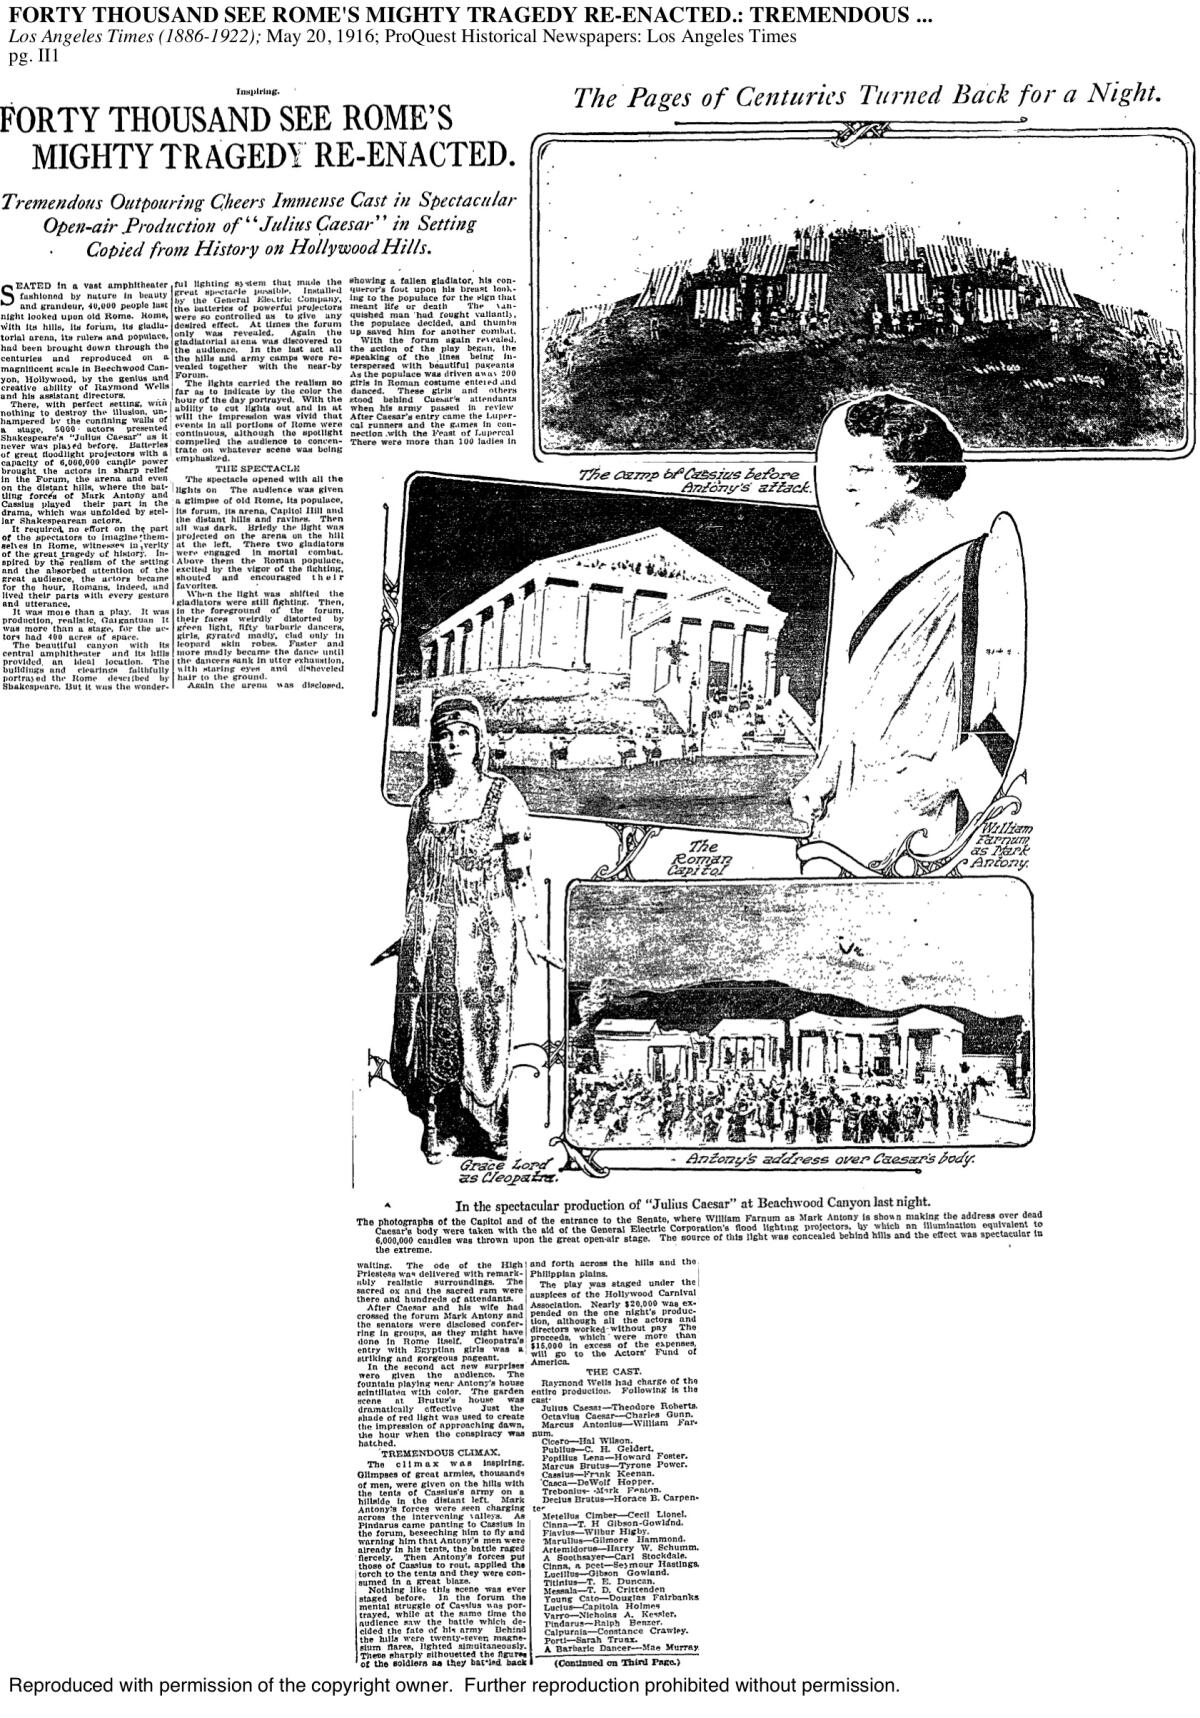 The Los Angeles Times on May 20, 1916, describes the first known performance on the site that would become the Hollywood Bowl.